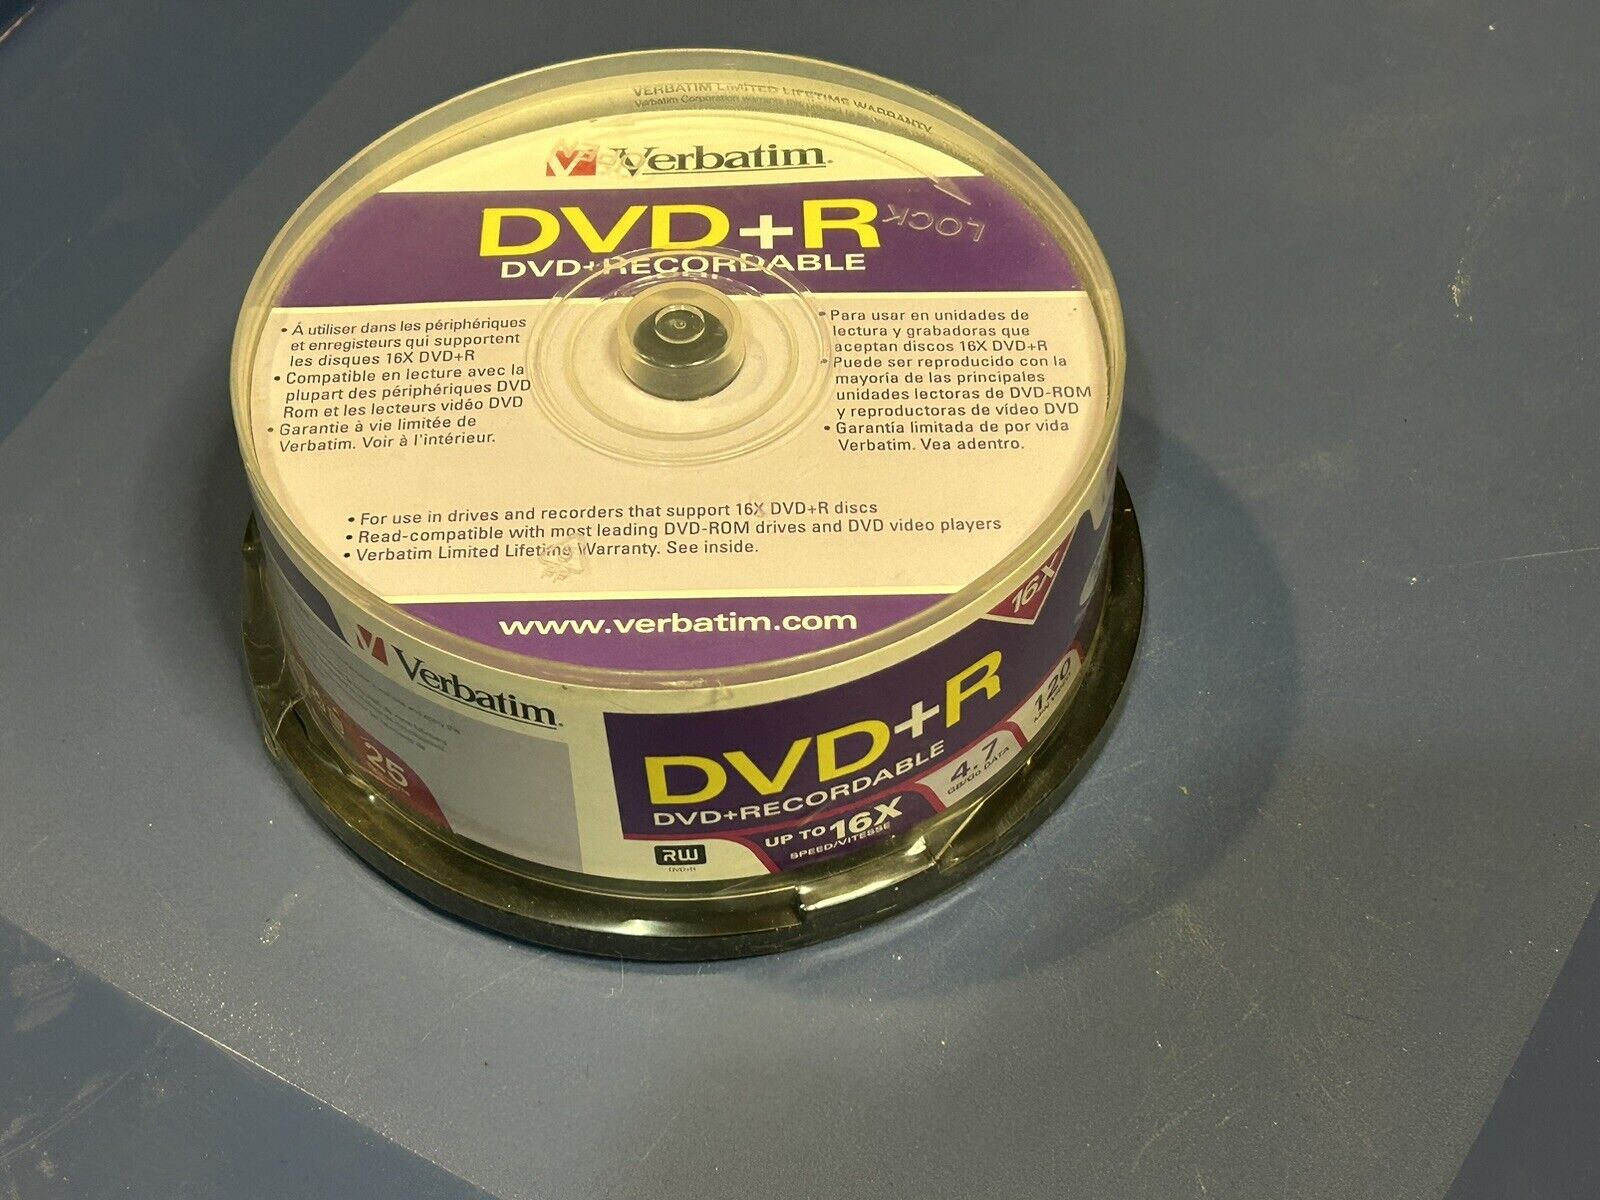 Verbatim AZO DVD+R 4.7GB 16X with Branded Surface - 25pk Spindle (95033)